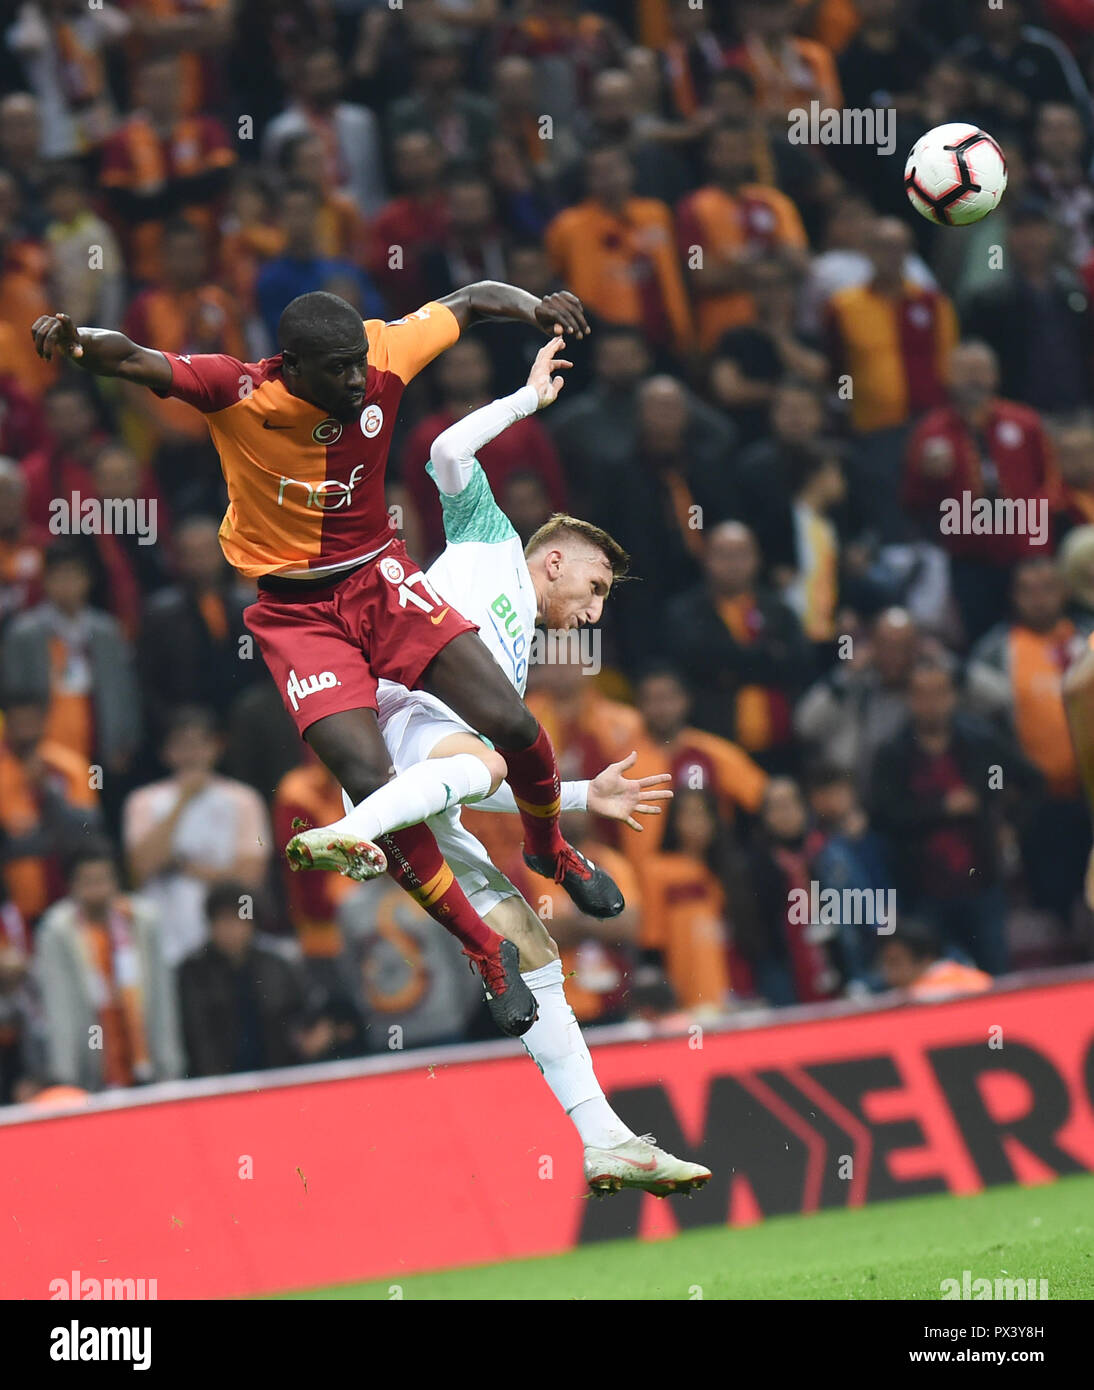 Istanbul, Turkey. 19th Oct, 2018. Papa Ndiaye (L) of Galatasaray vies with Burak Kapacak of Bursaspor during a Turkish Super League match in Istanbul, Turkey, Oct. 19, 2018. The match ended with a draw of 1-1. Credit: He Canling/Xinhua/Alamy Live News Stock Photo